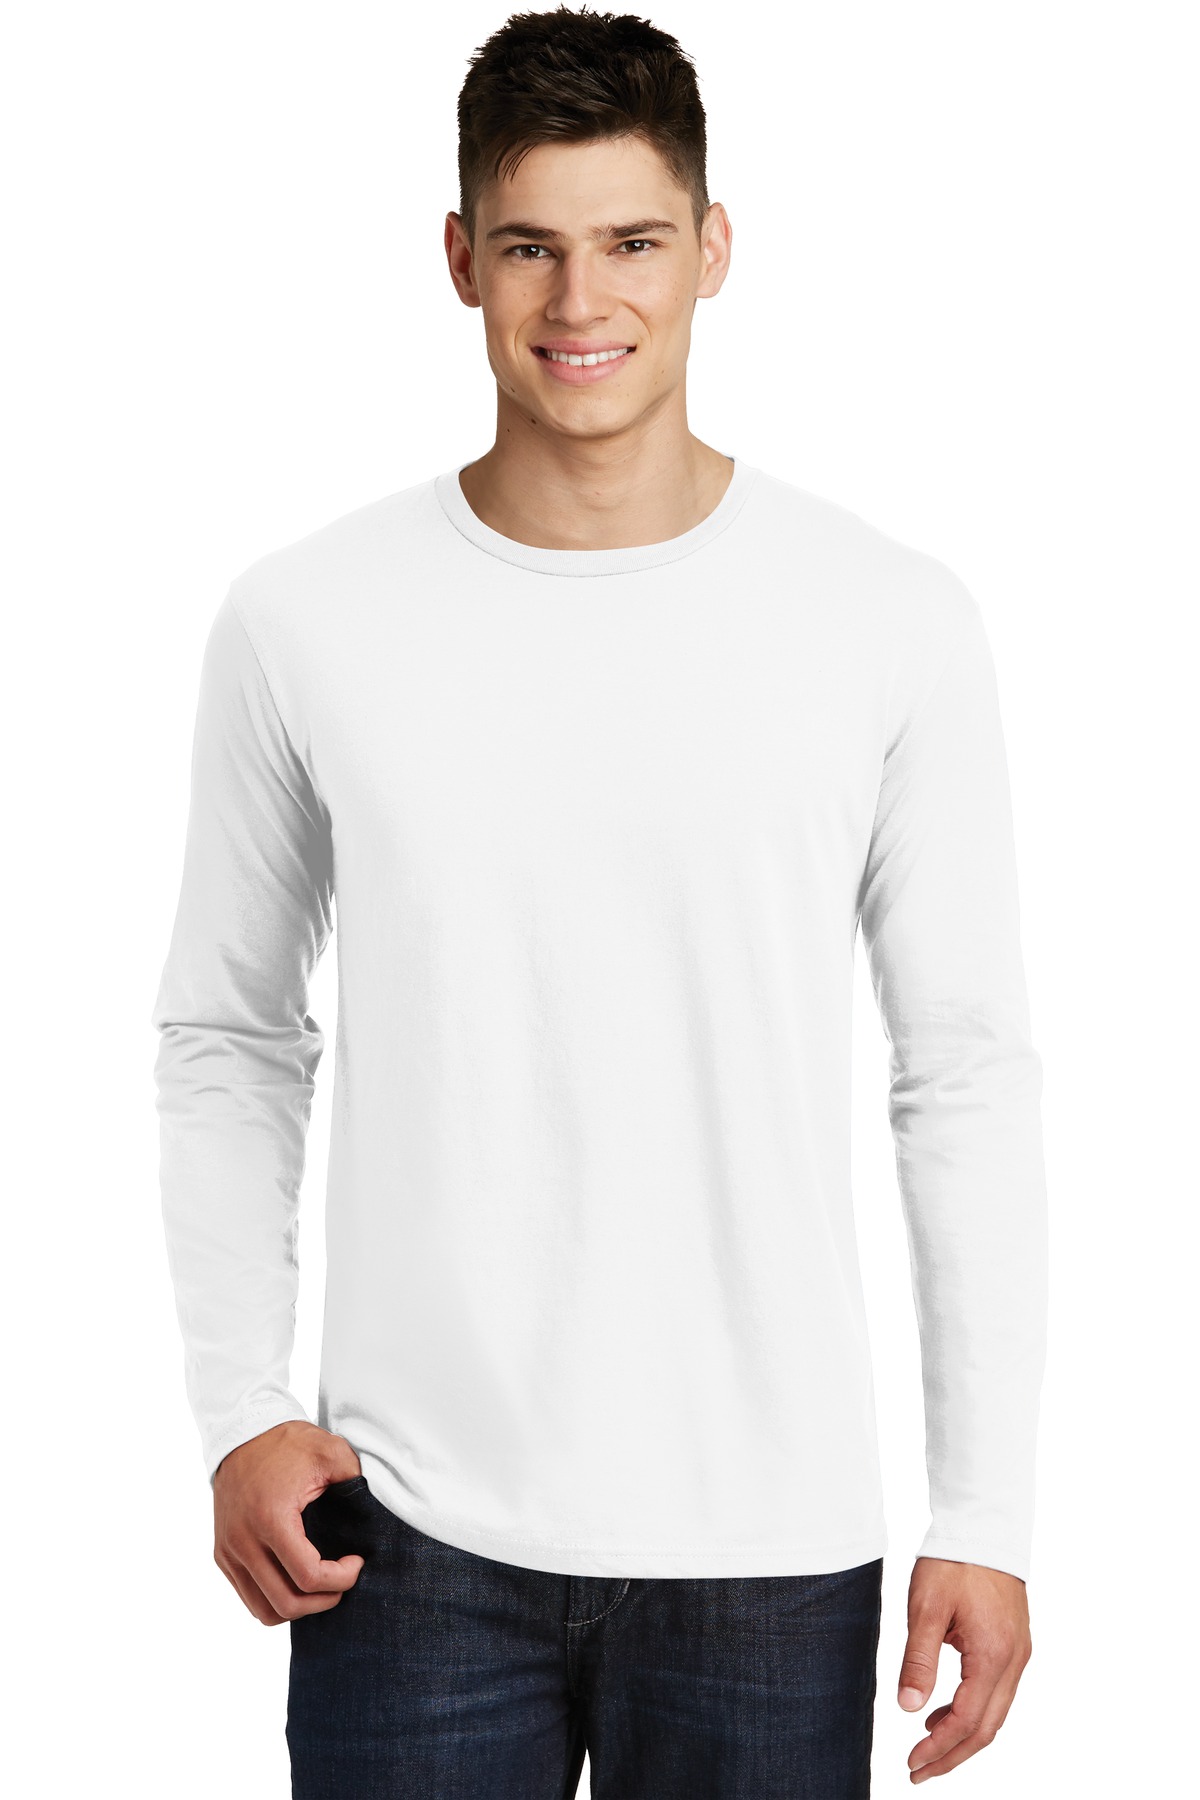 District  Young Mens Very Important Tee  Long Sleeve. DT6200